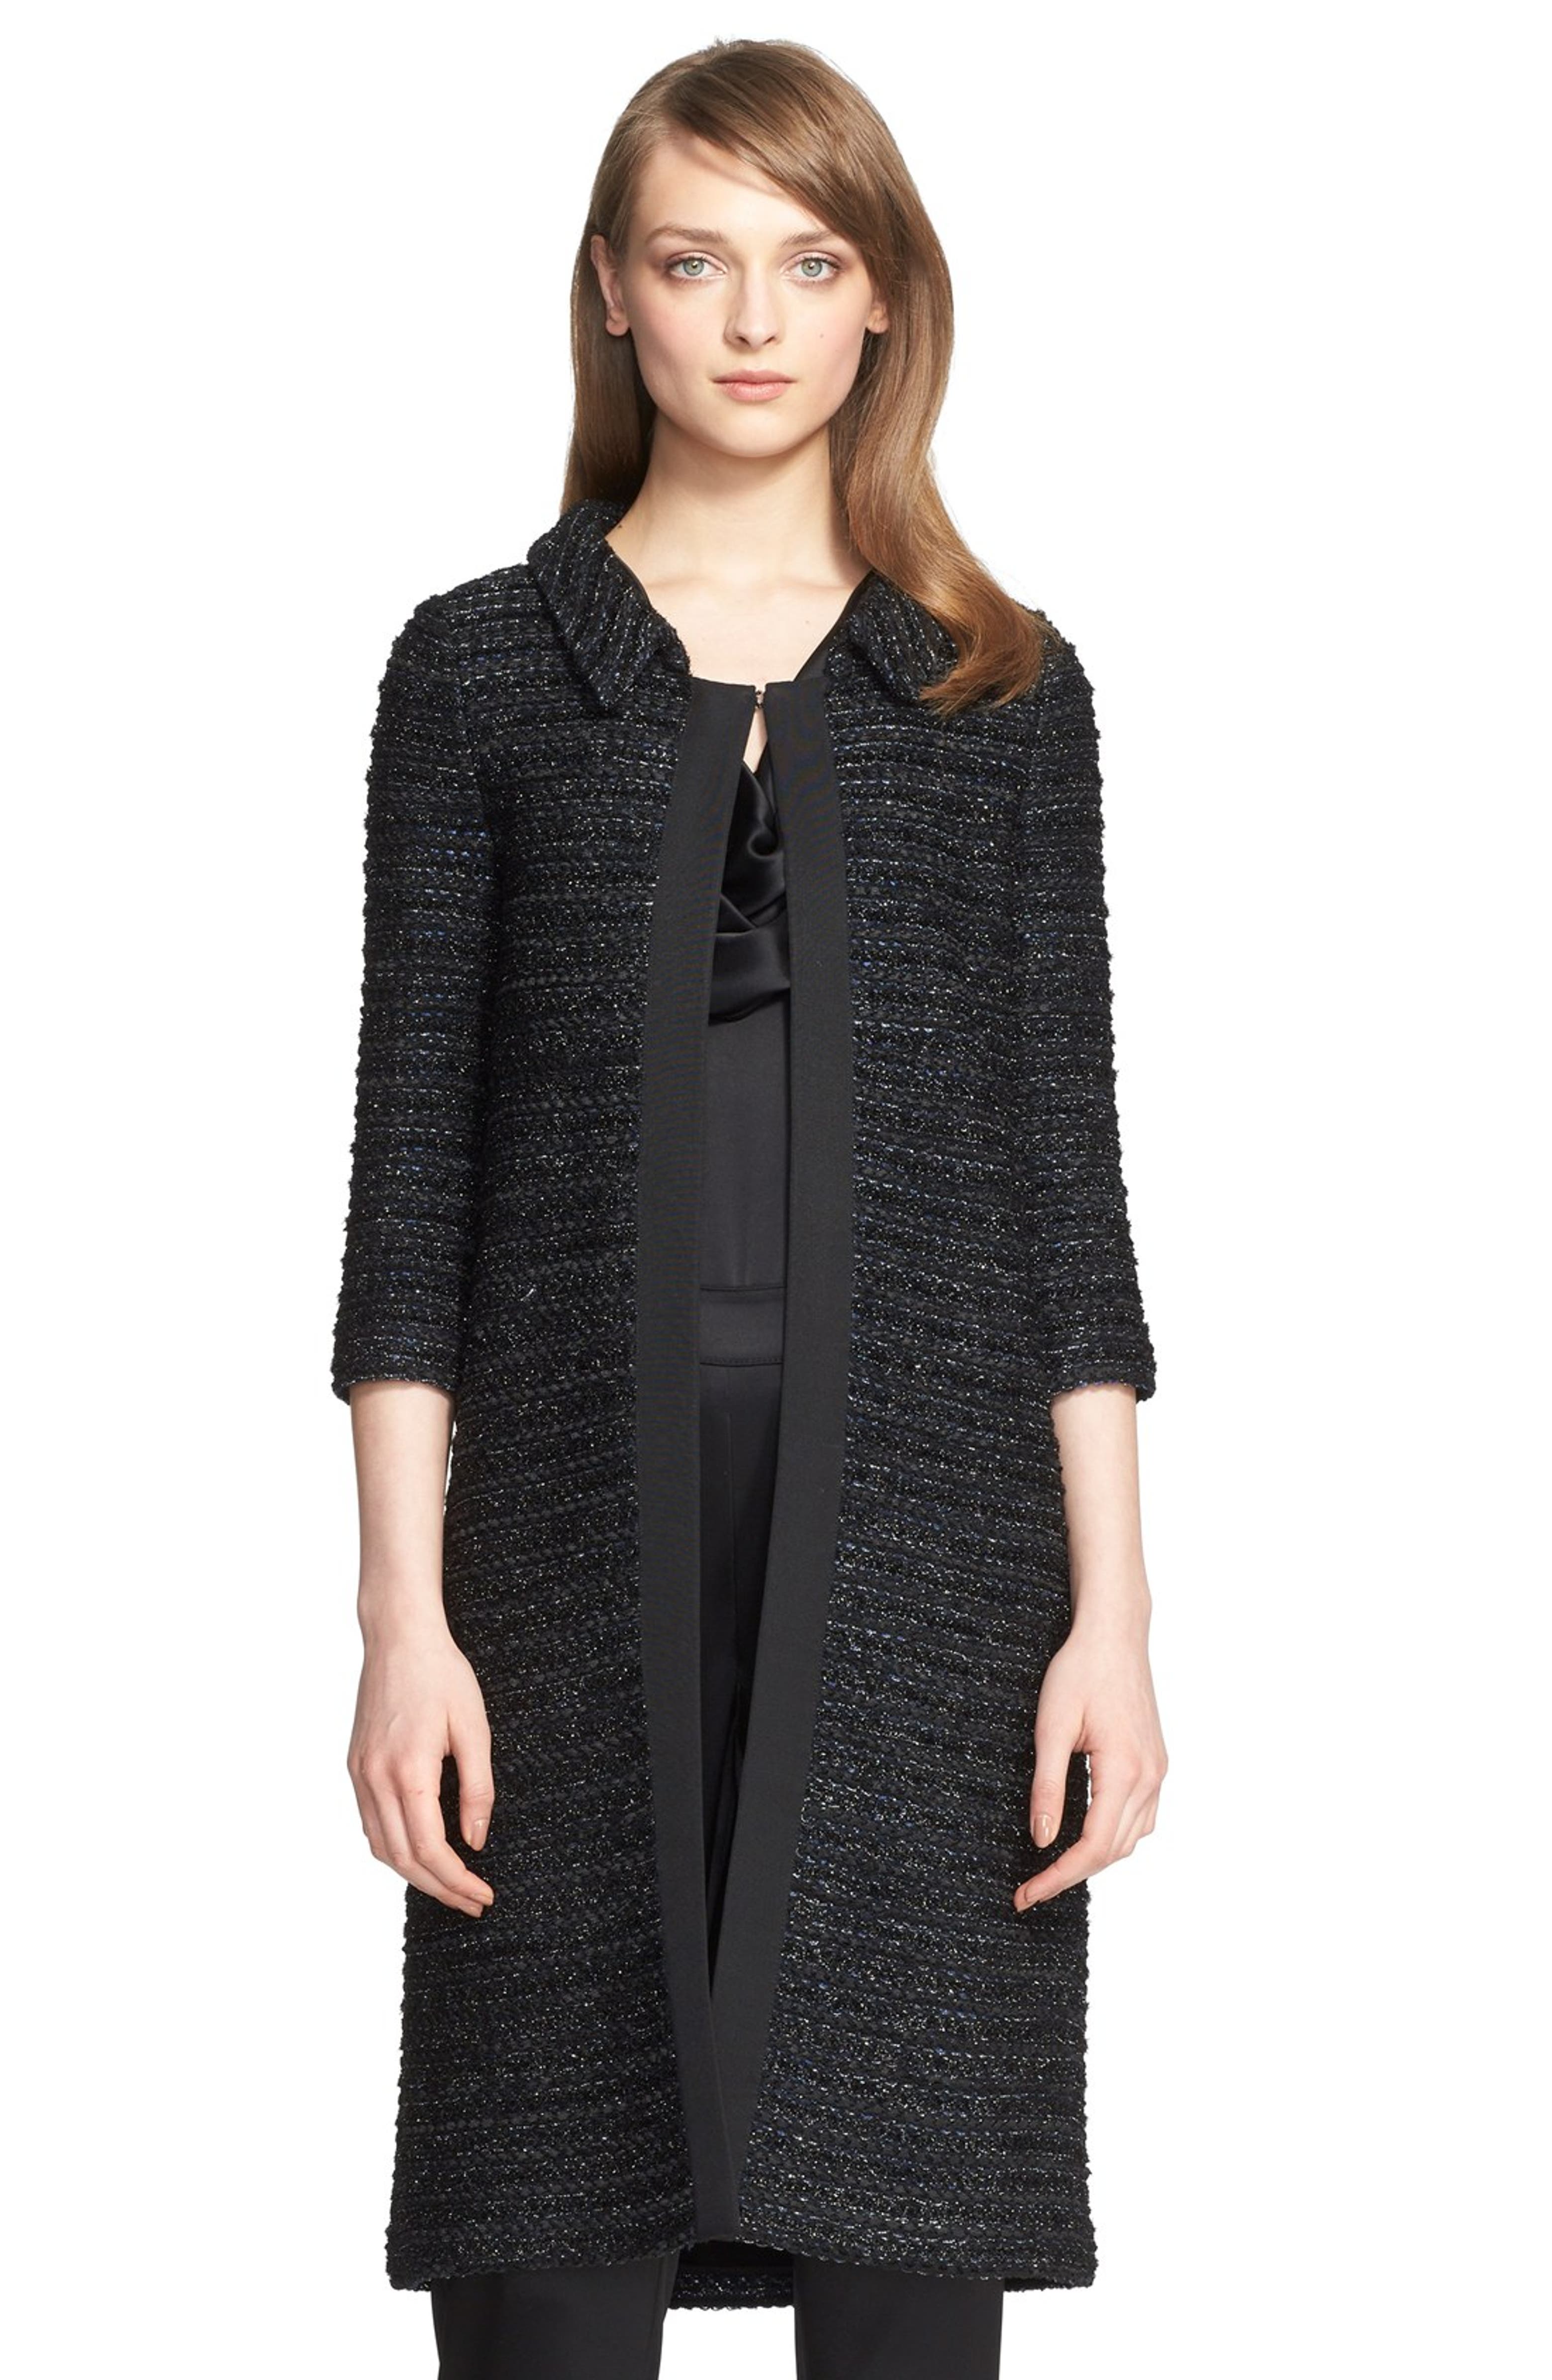 St. John Collection Ribbon Texture Tweed Knit Topper | Nordstrom